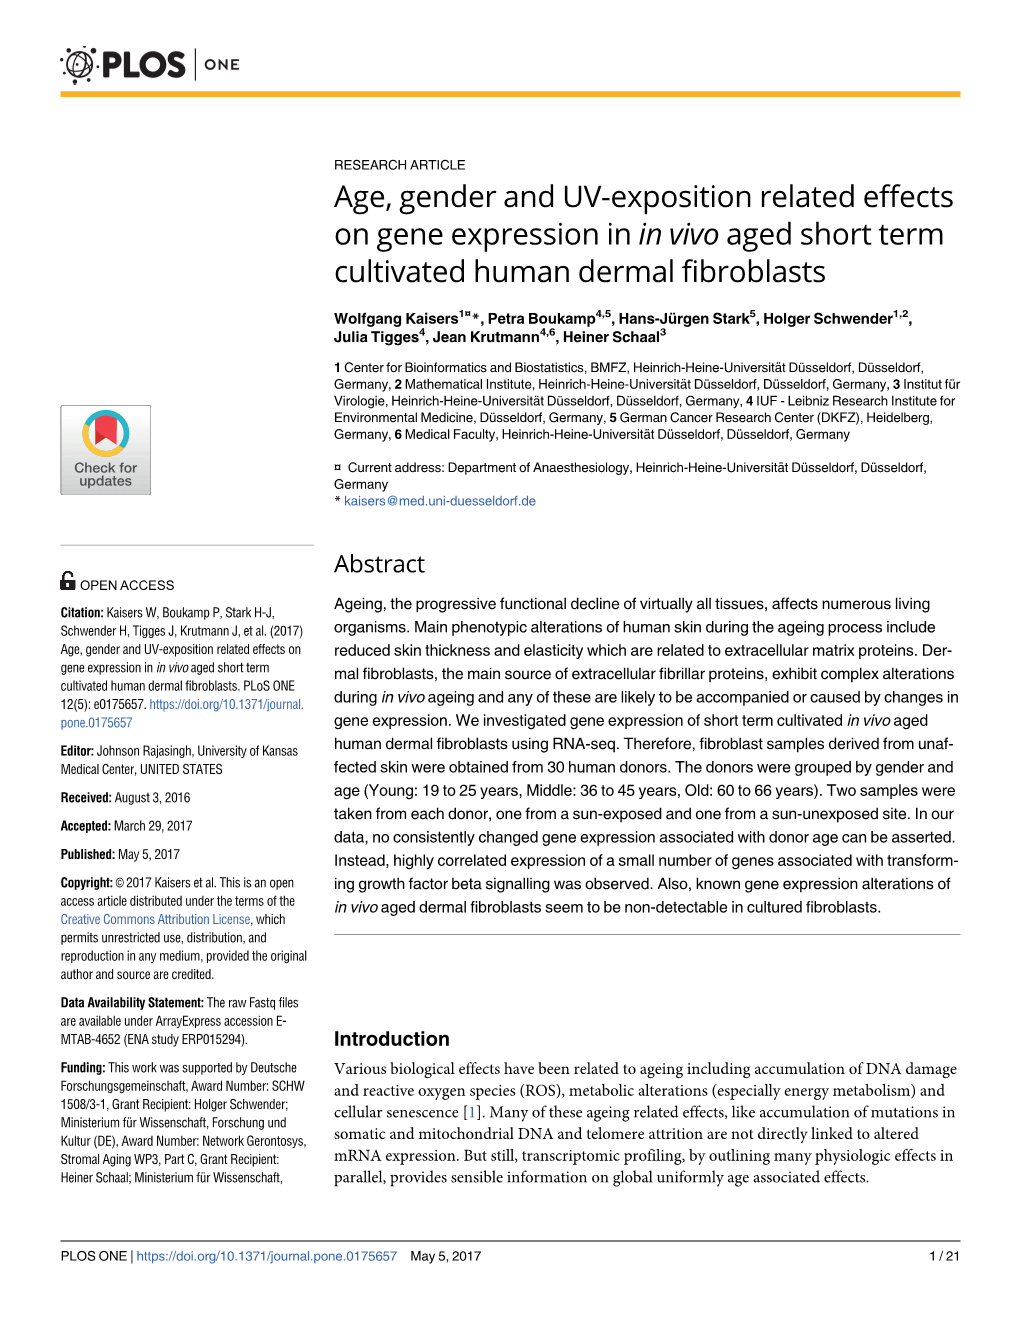 Age, Gender and UV-Exposition Related Effects on Gene Expression in in Vivo Aged Short Term Cultivated Human Dermal Fibroblasts